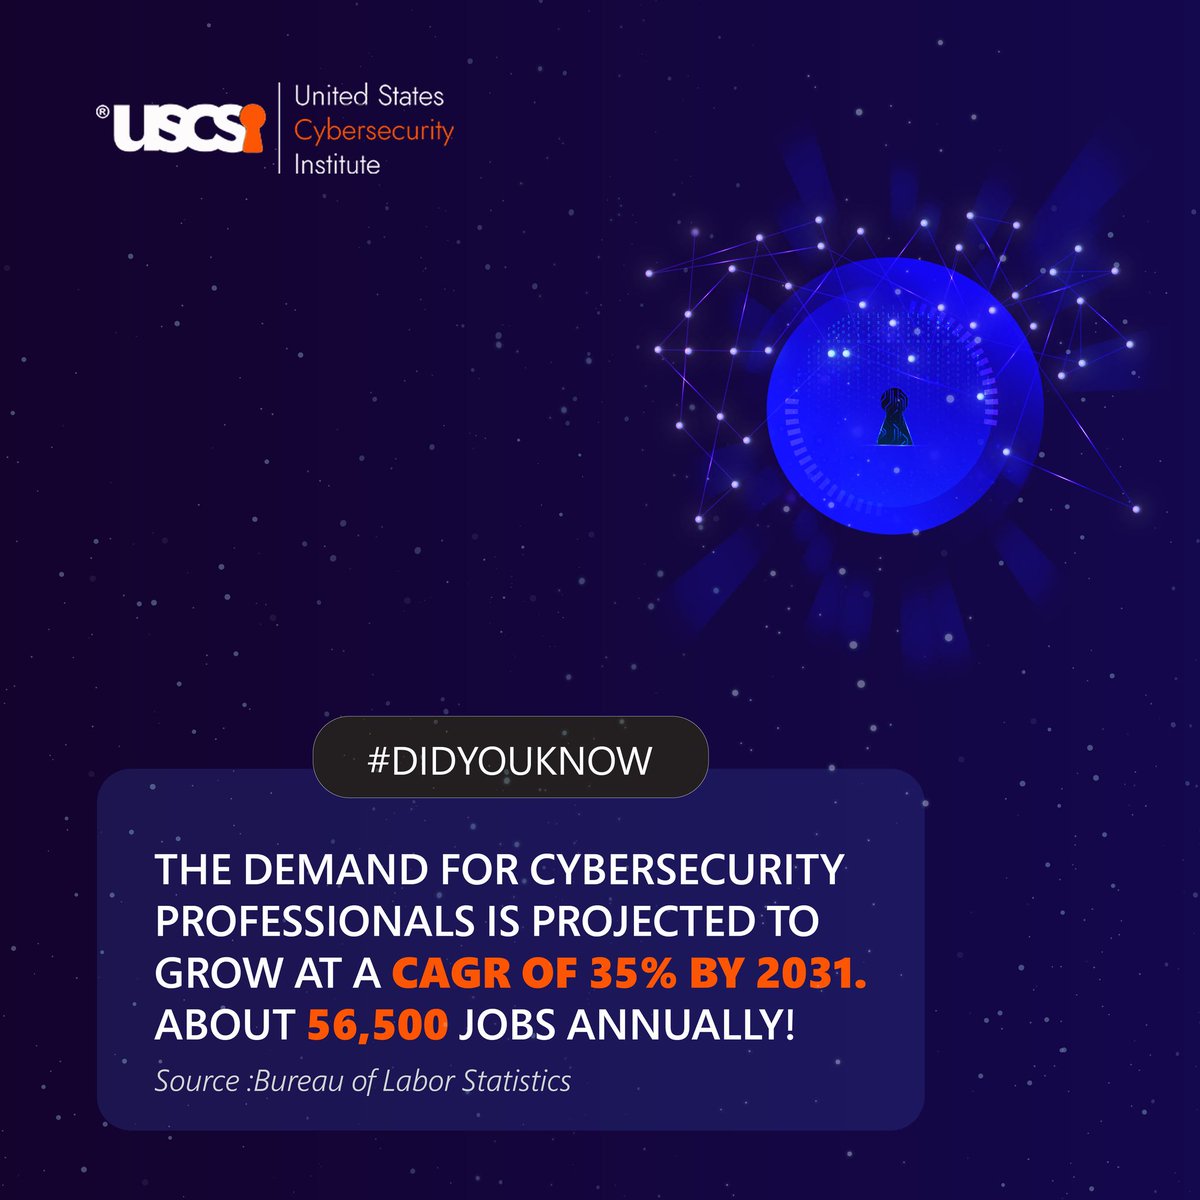 Unlock your future in #cybersecurity! The field is booming with endless opportunities. Protect, defend, and secure the digital world. Join the ranks of experts with world-class USCSI® certifications. bit.ly/45Ypcgh

#USCSI #CybersecurityCareers #CyberAware #datasecurity